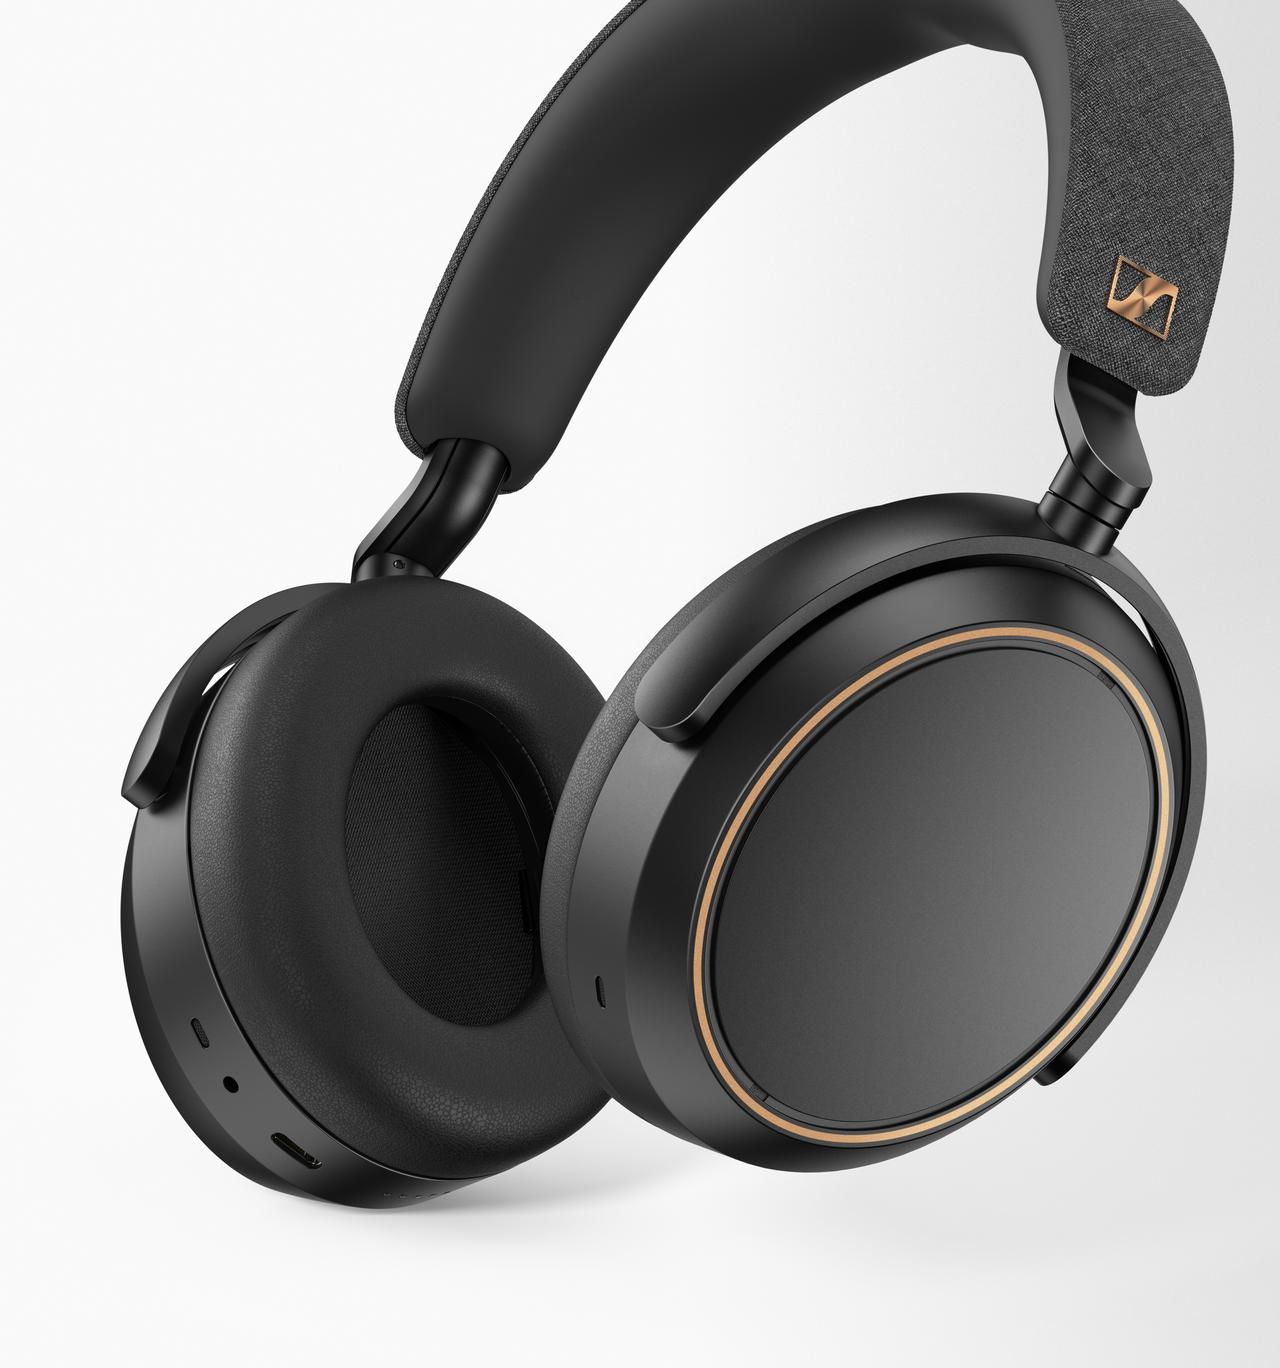 Is there any diffrence between Sennheiser Momentum 4 vs Momentum 4